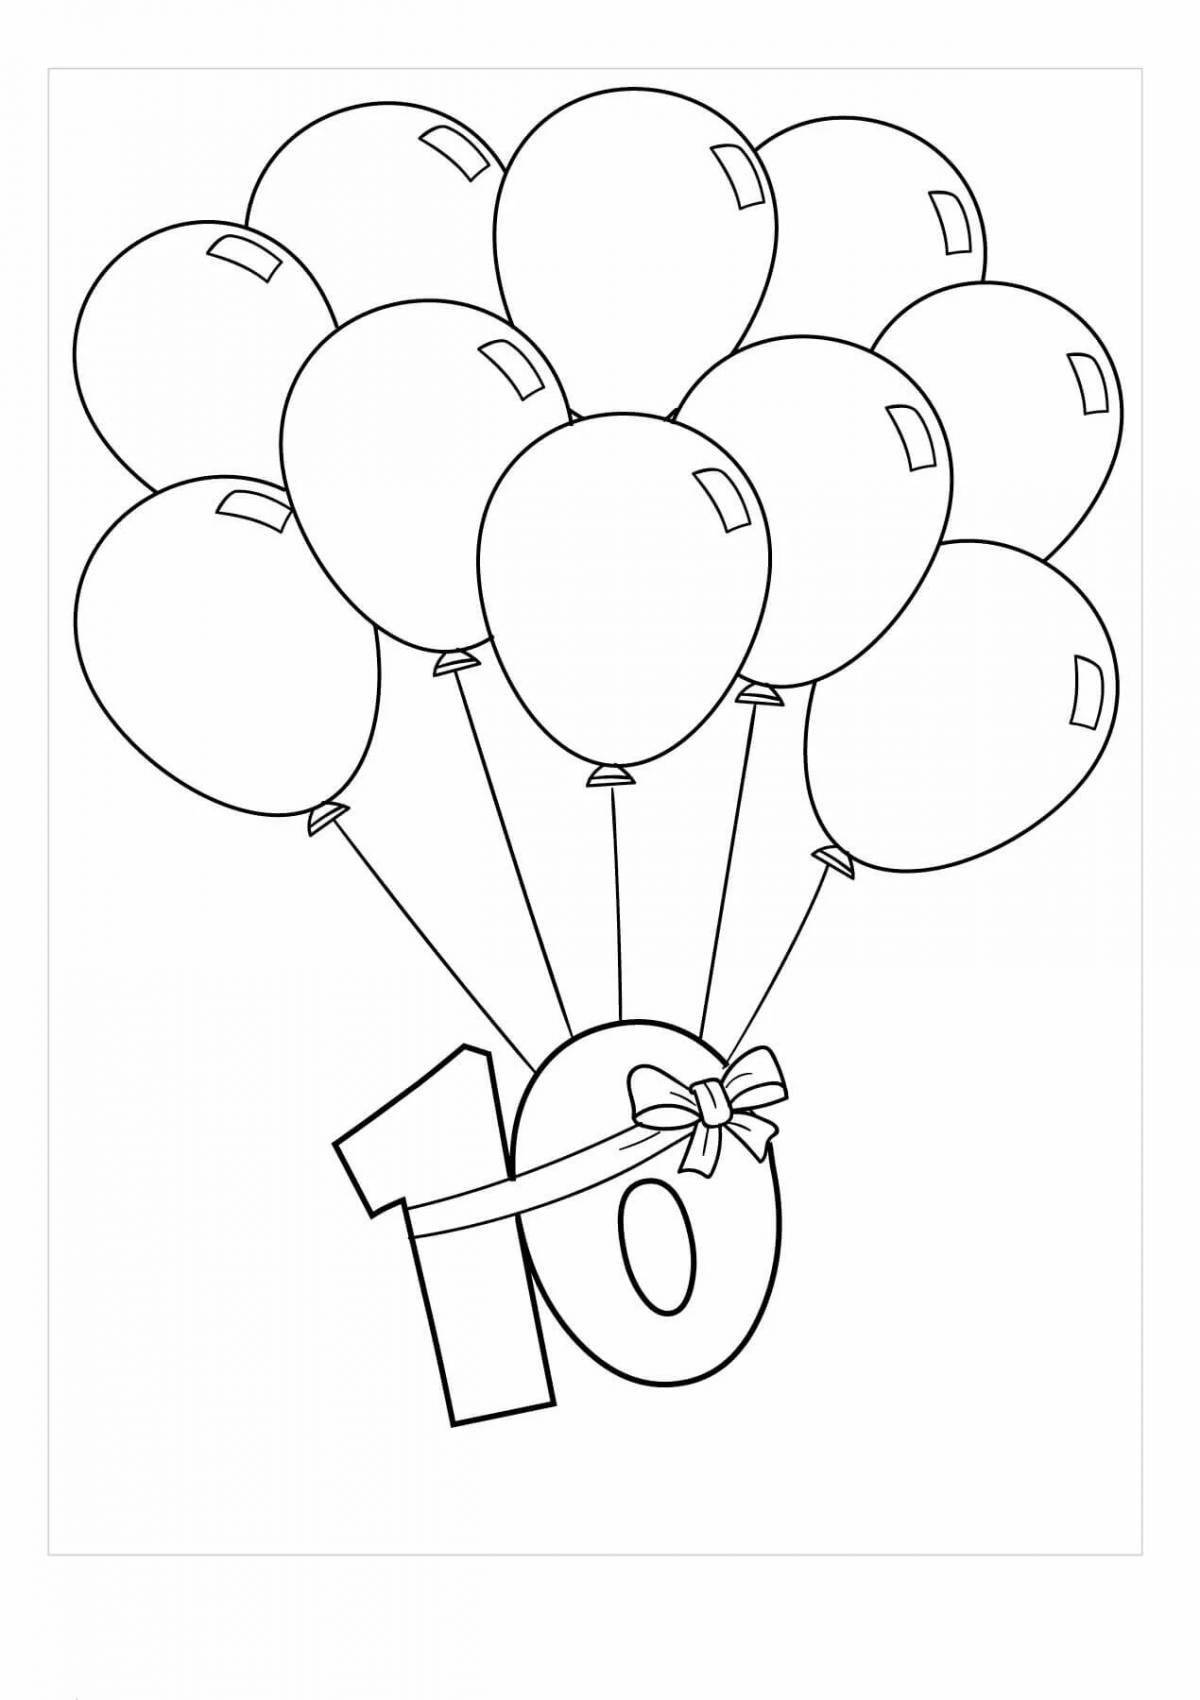 Live balloons coloring for children 2-3 years old